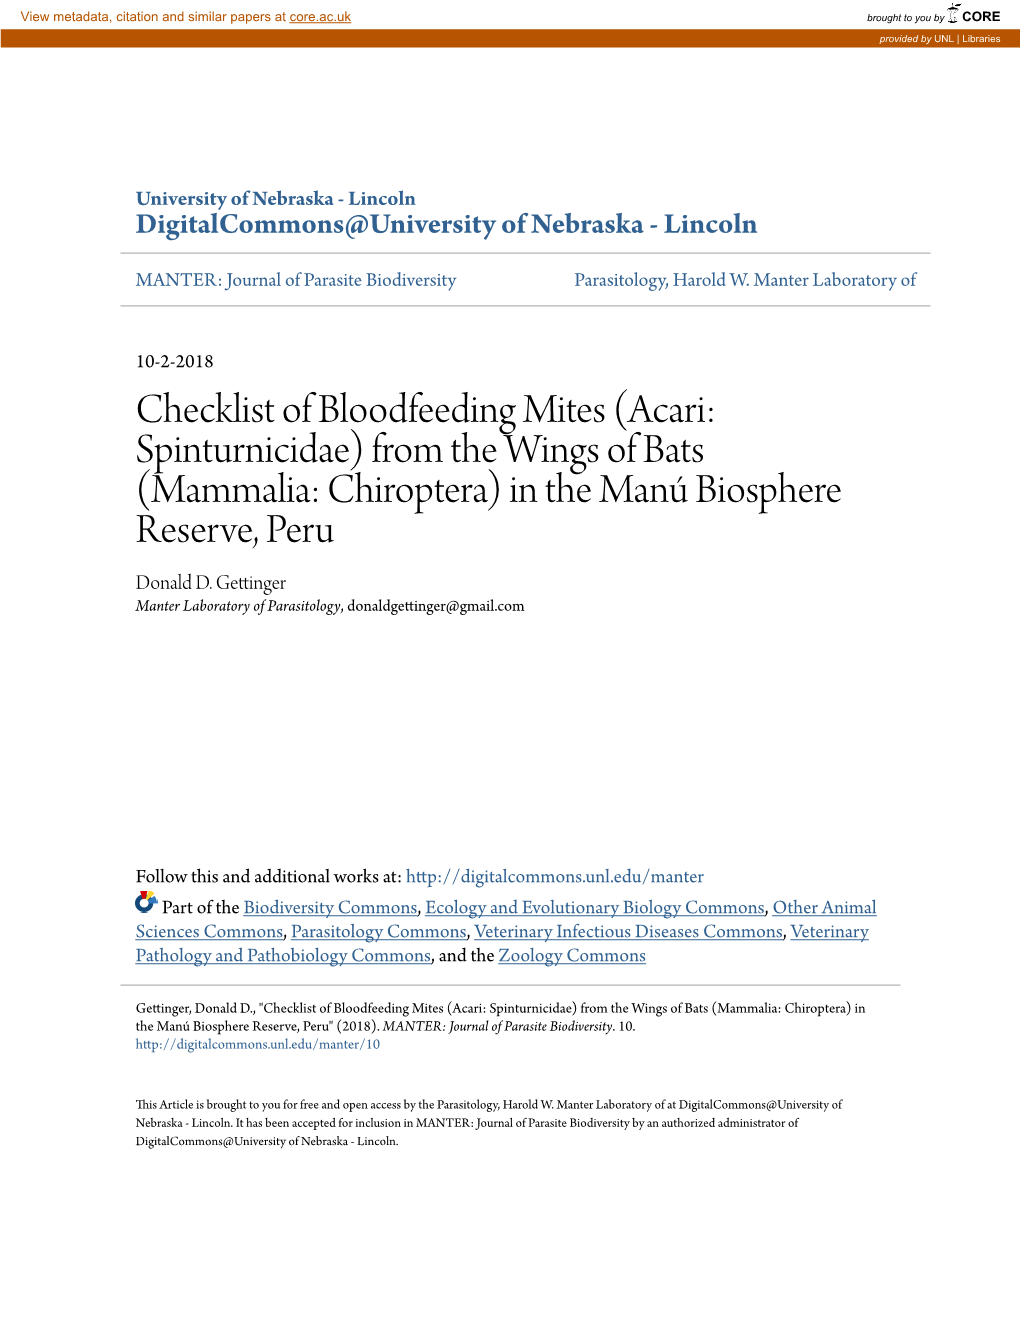 Checklist of Bloodfeeding Mites (Acari: Spinturnicidae) from the Wings of Bats (Mammalia: Chiroptera) in the Manú Biosphere Reserve, Peru Donald D